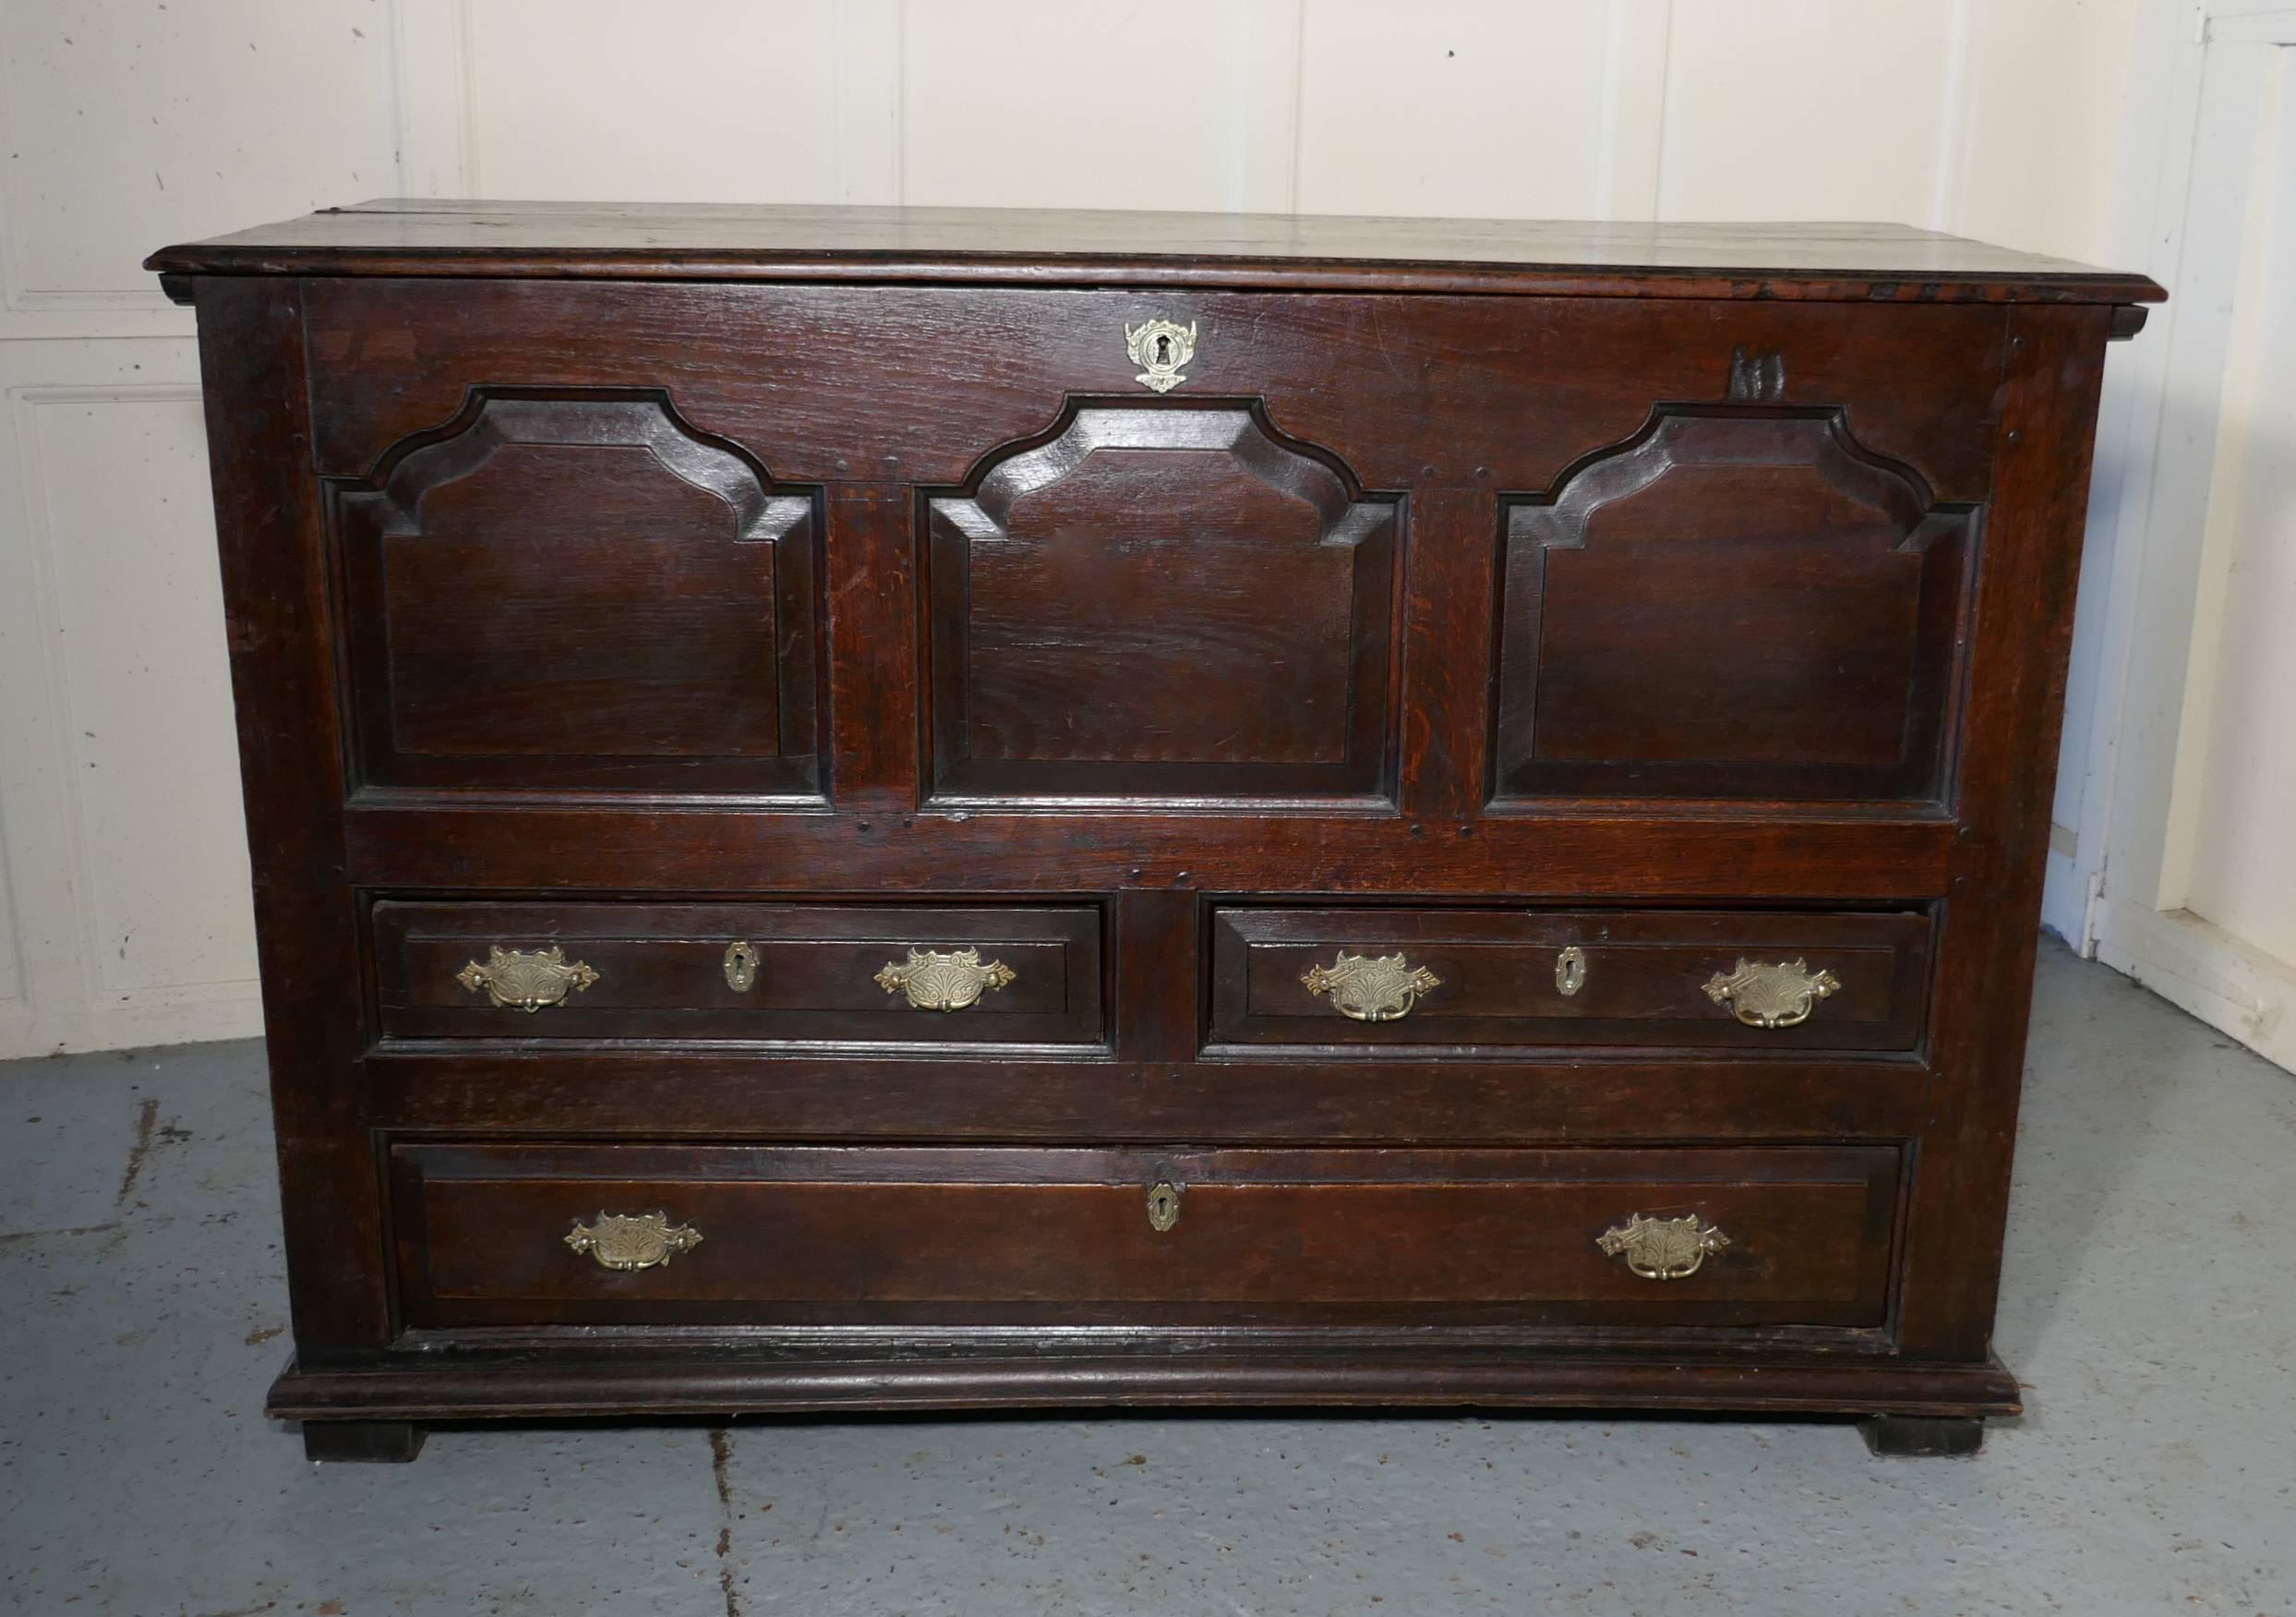 Large 18th century oak three-drawer Mule chest, 

This is fine looking piece, dating from the mid-18th century
The coffer has a three plank hinged top, over a panelled front decoration, beneath this it has two short over one long drawer in the